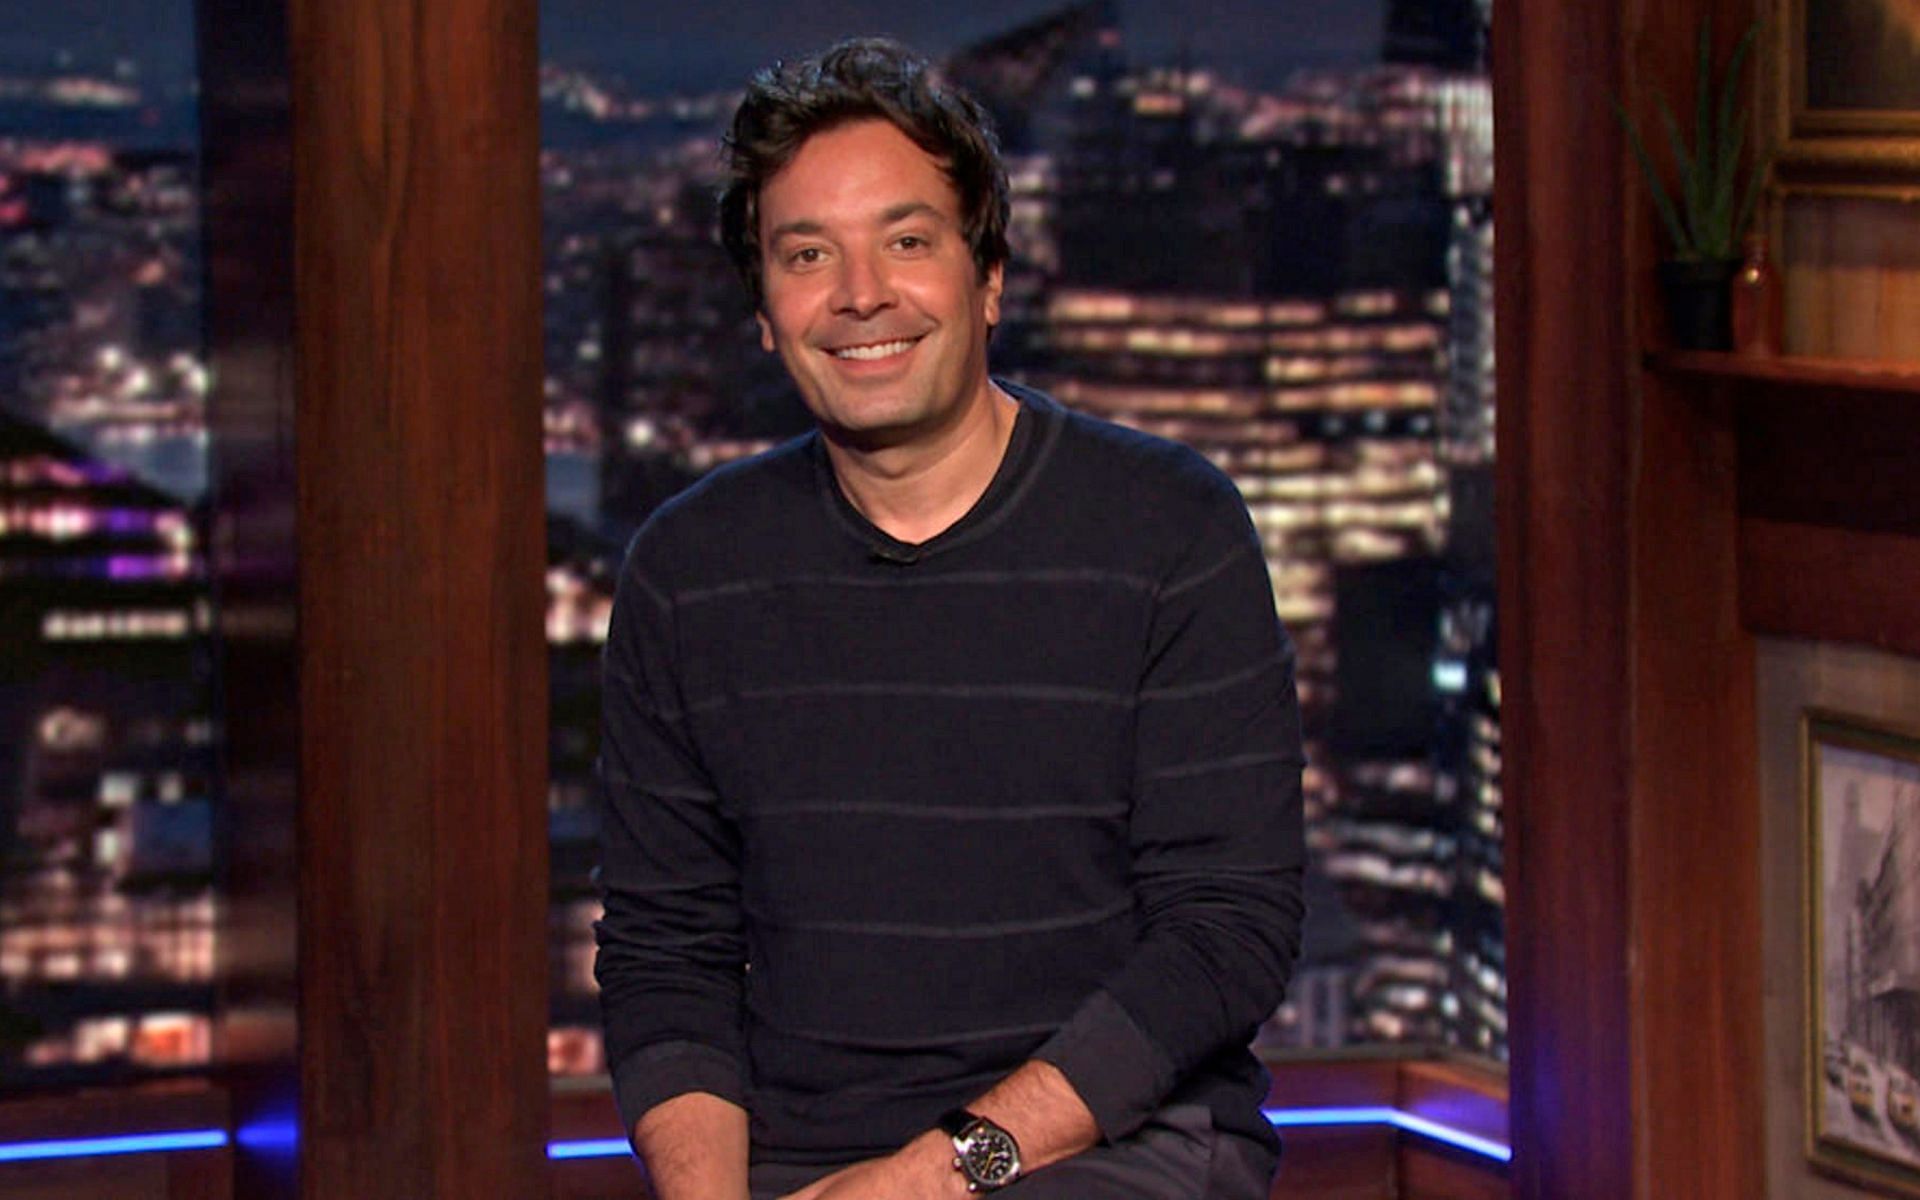 Jimmy Fallon tested positive for coronavirus despite being double vaccinated and having a booster shot (Image via Getty Images/ NBC)